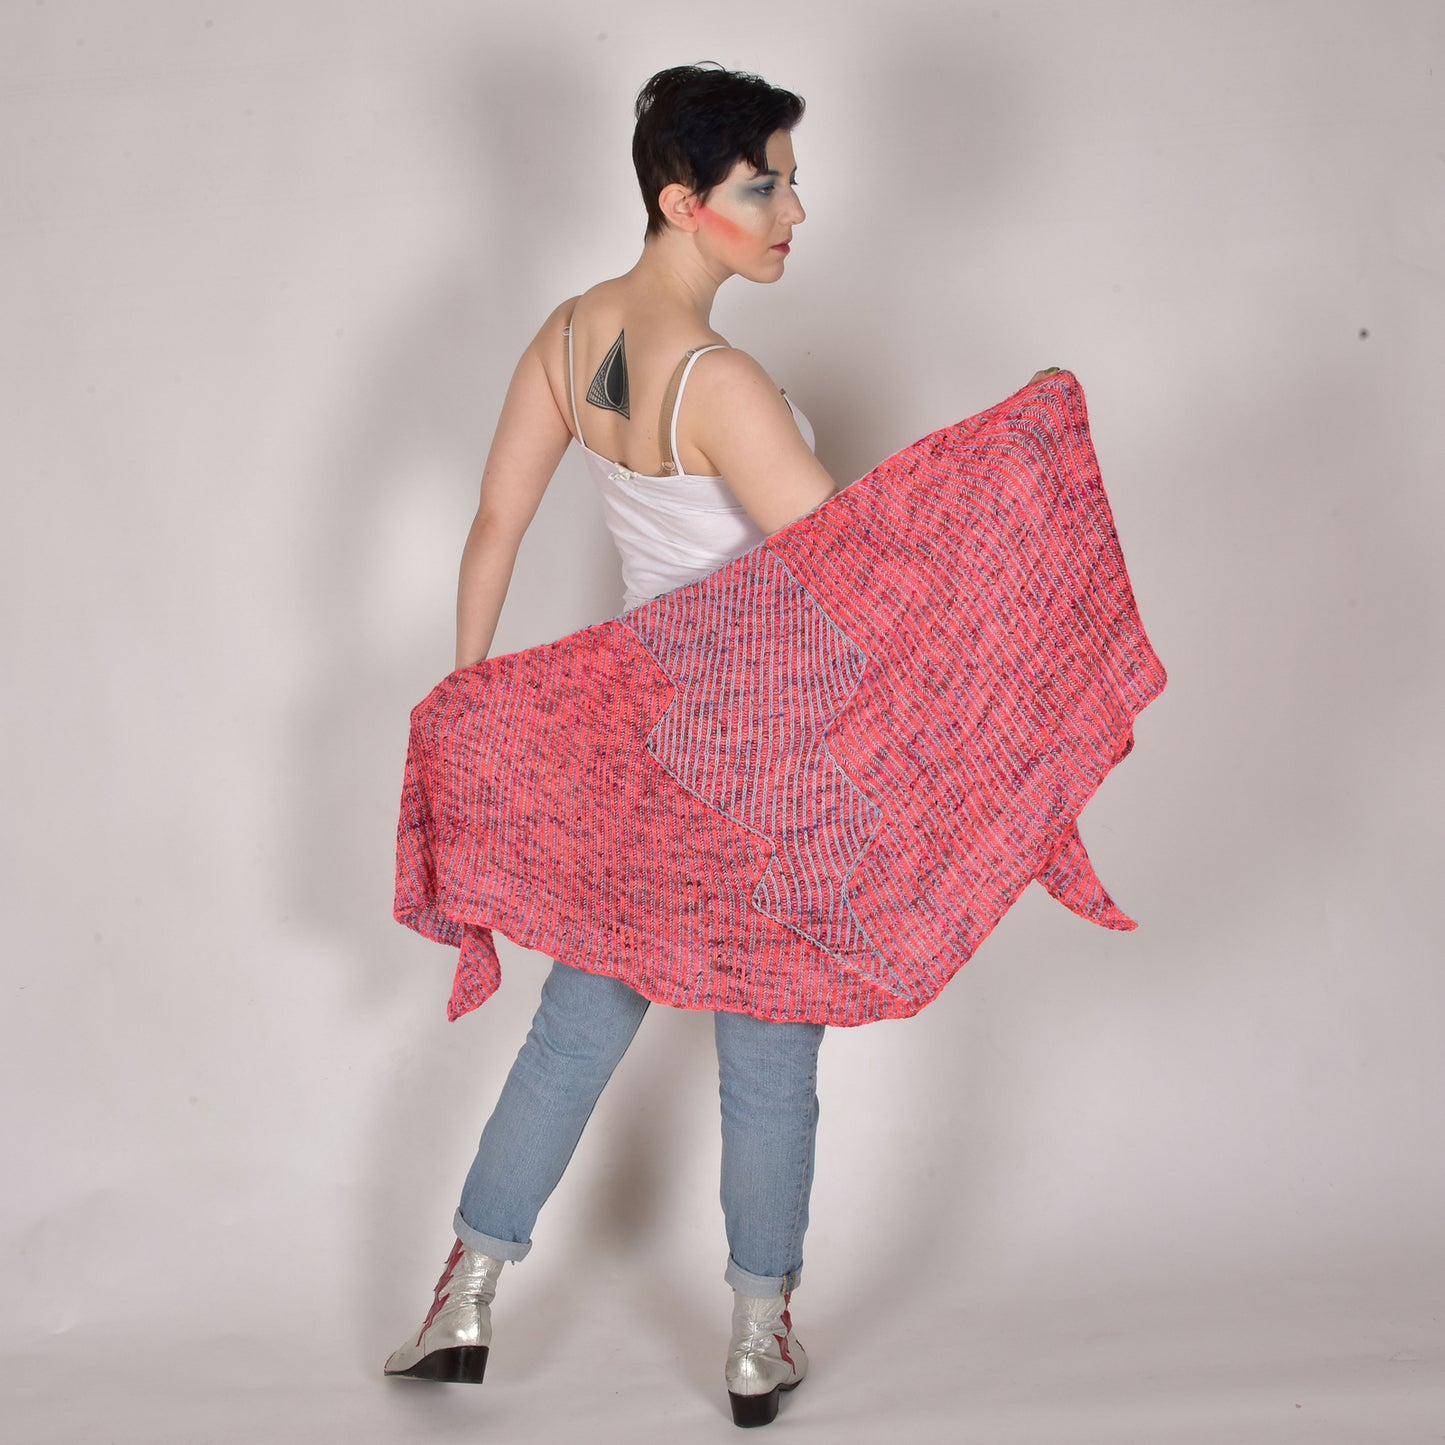 Thunderbolt Shawl - A Pattern By Xandy Peters